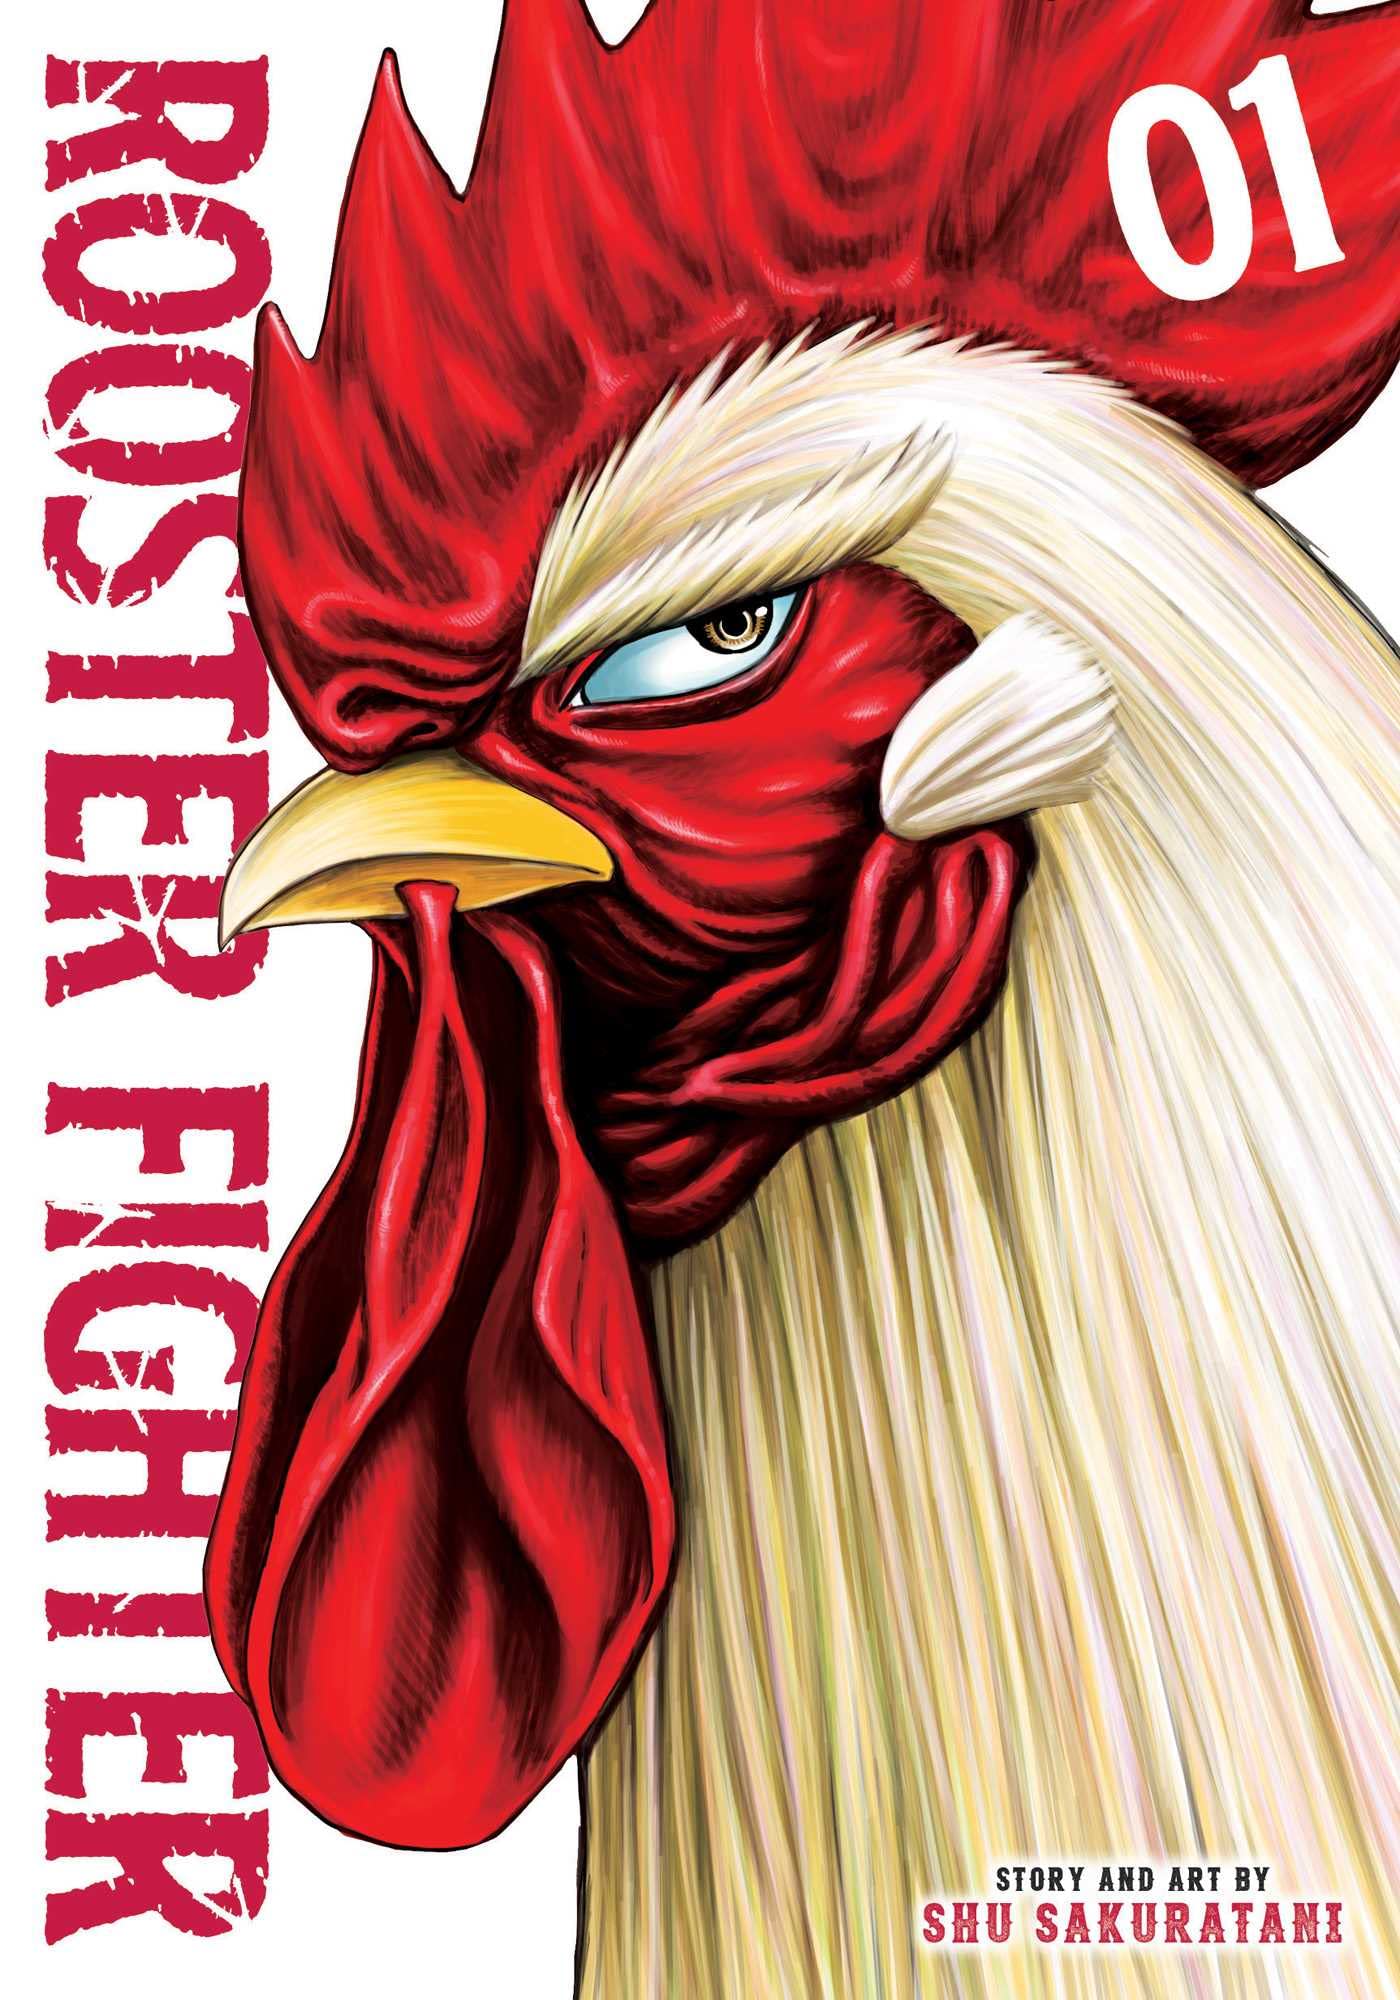 Rooster Fighter Vol. 01